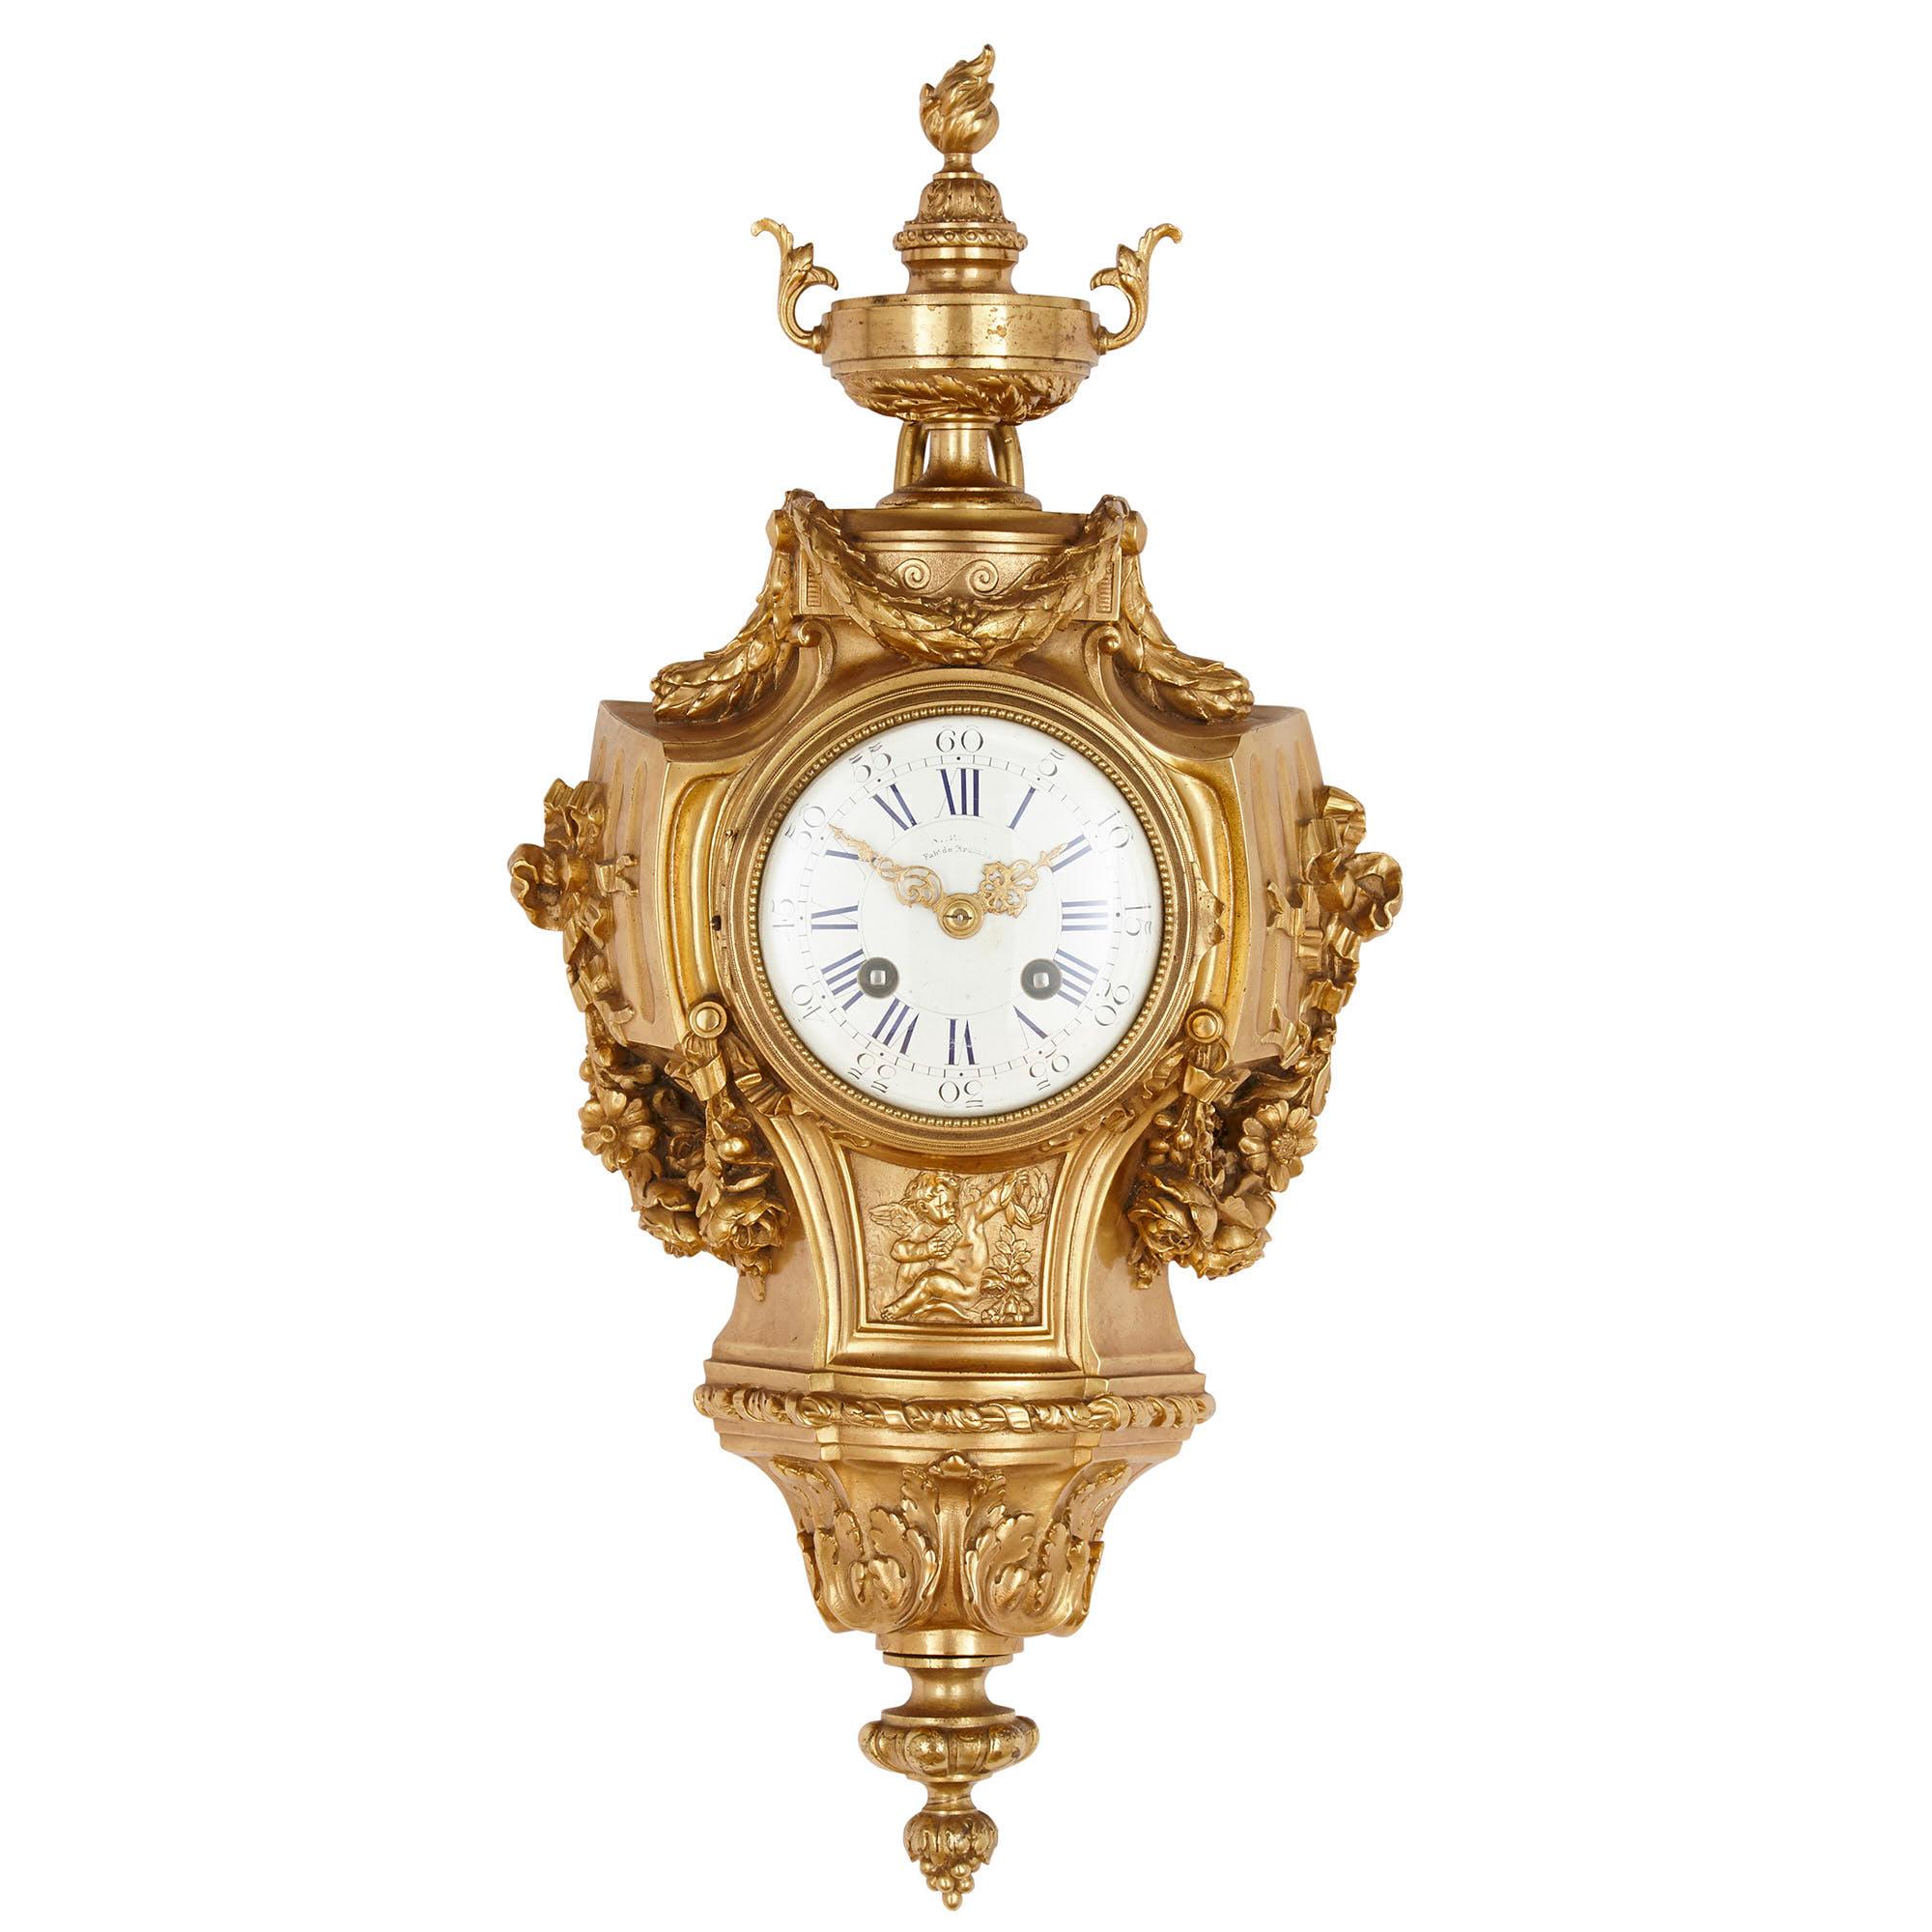 This beautiful clock and barometer are contained by matching gilt bronze cases, wrought in the elaborate Louis XVI style, the duo thus constituting a pair. The cases feature gilt bronze foliate mounts throughout. Below the dial of each instrument is